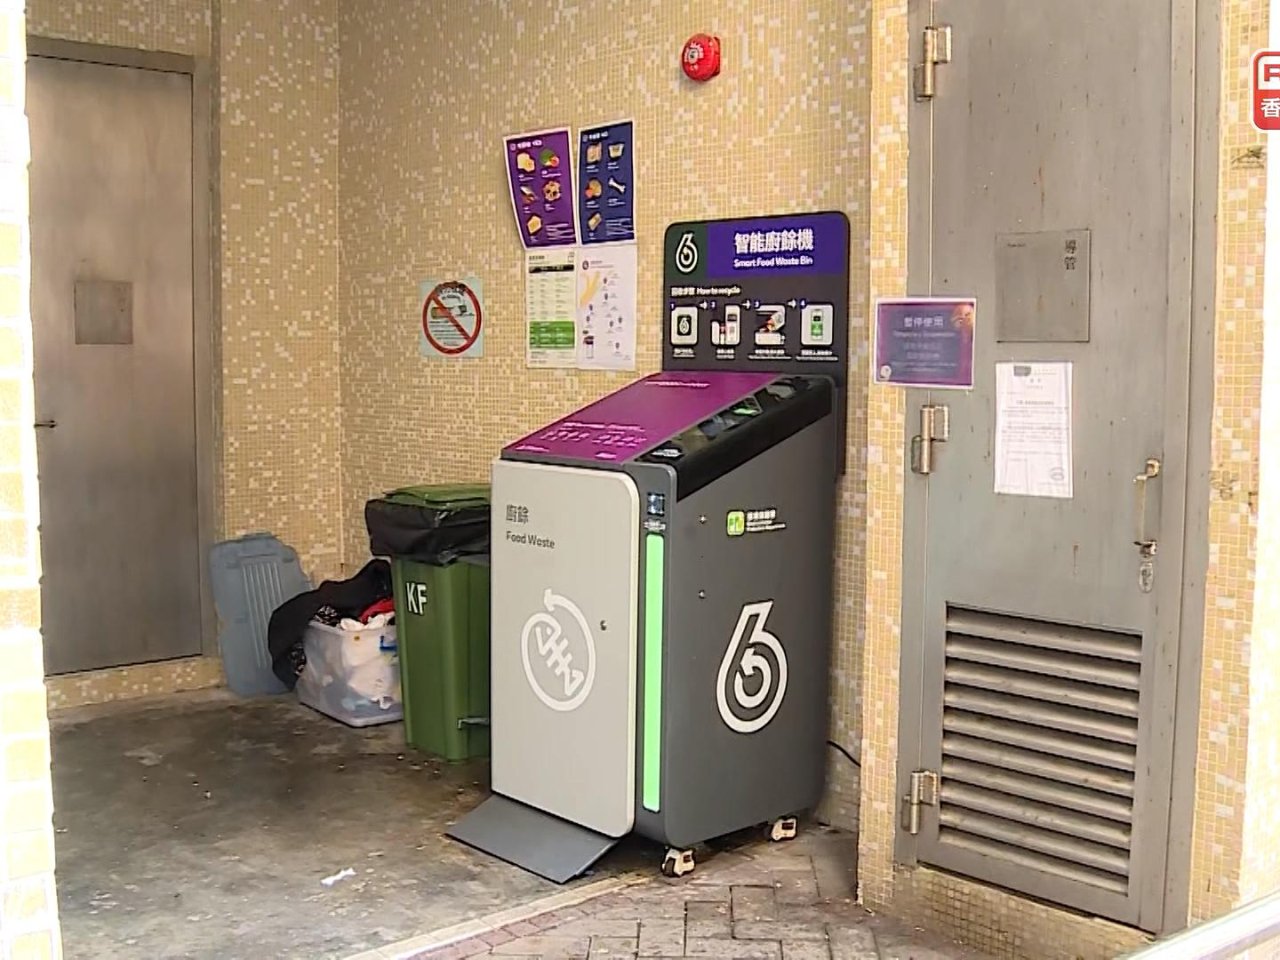 EPD gives reassurance over food waste recycling bins